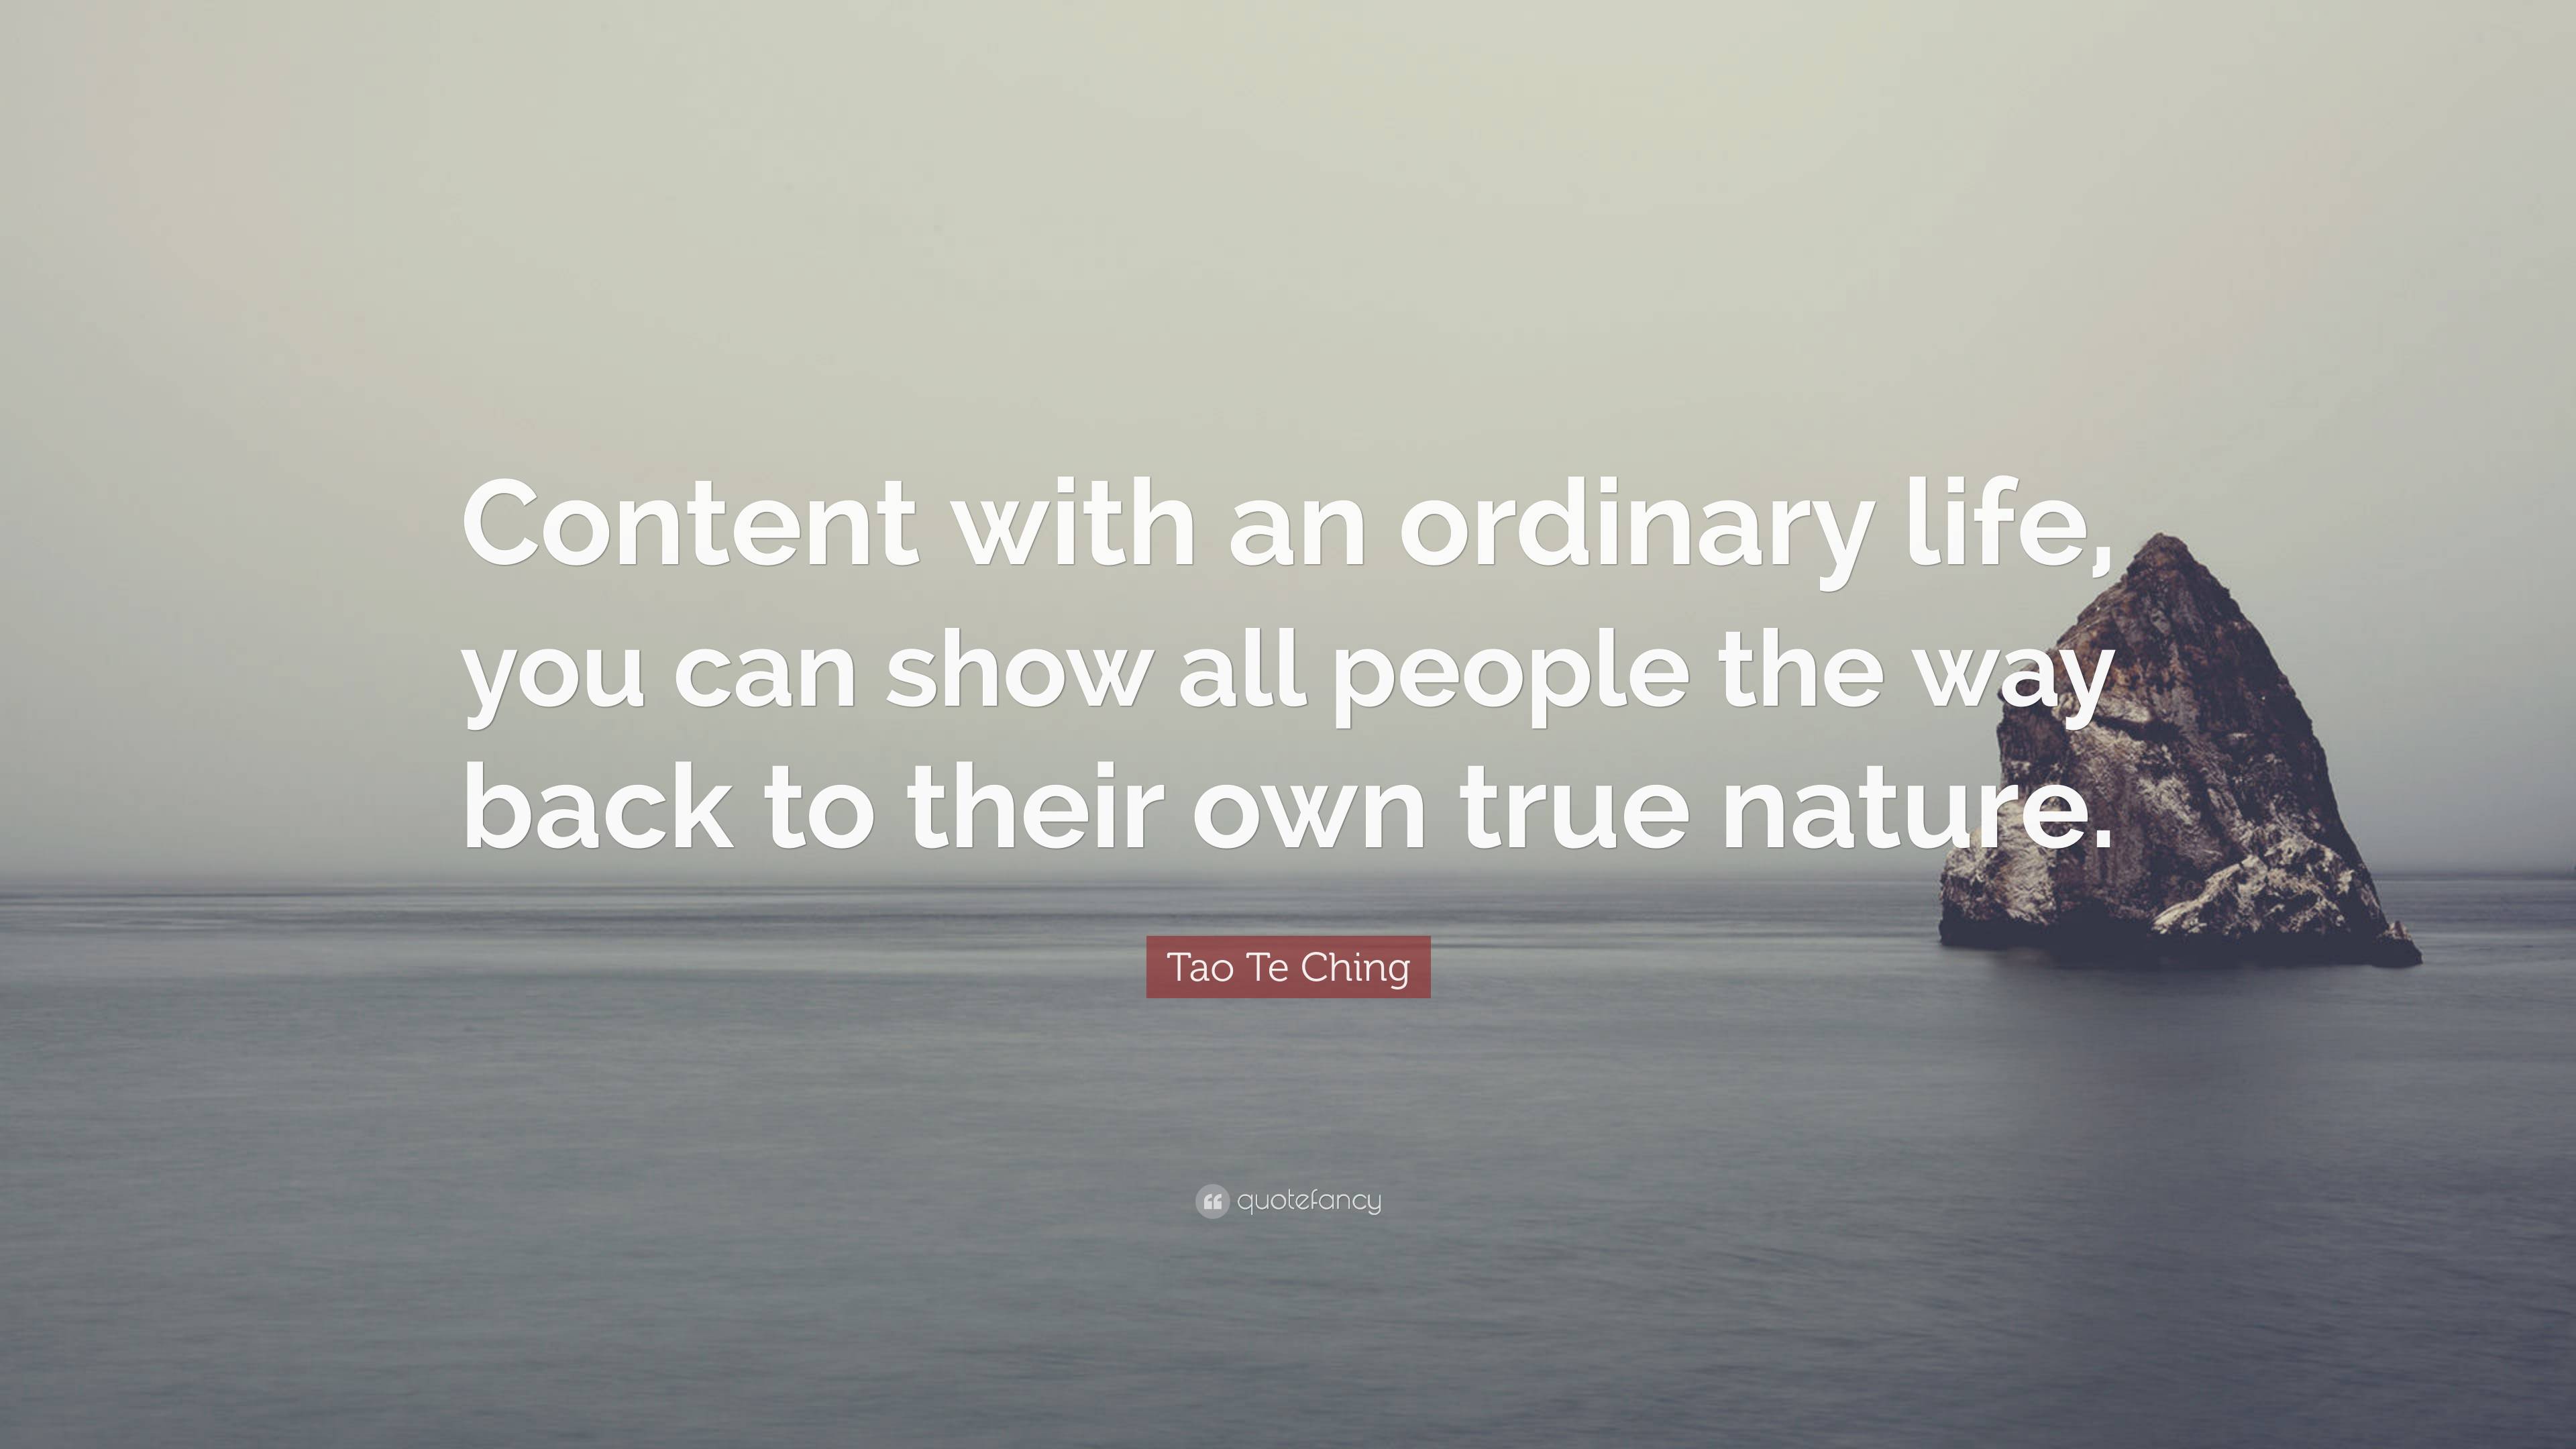 Tao Te Ching Quote: “Content with an ordinary life, you can show all people  the way